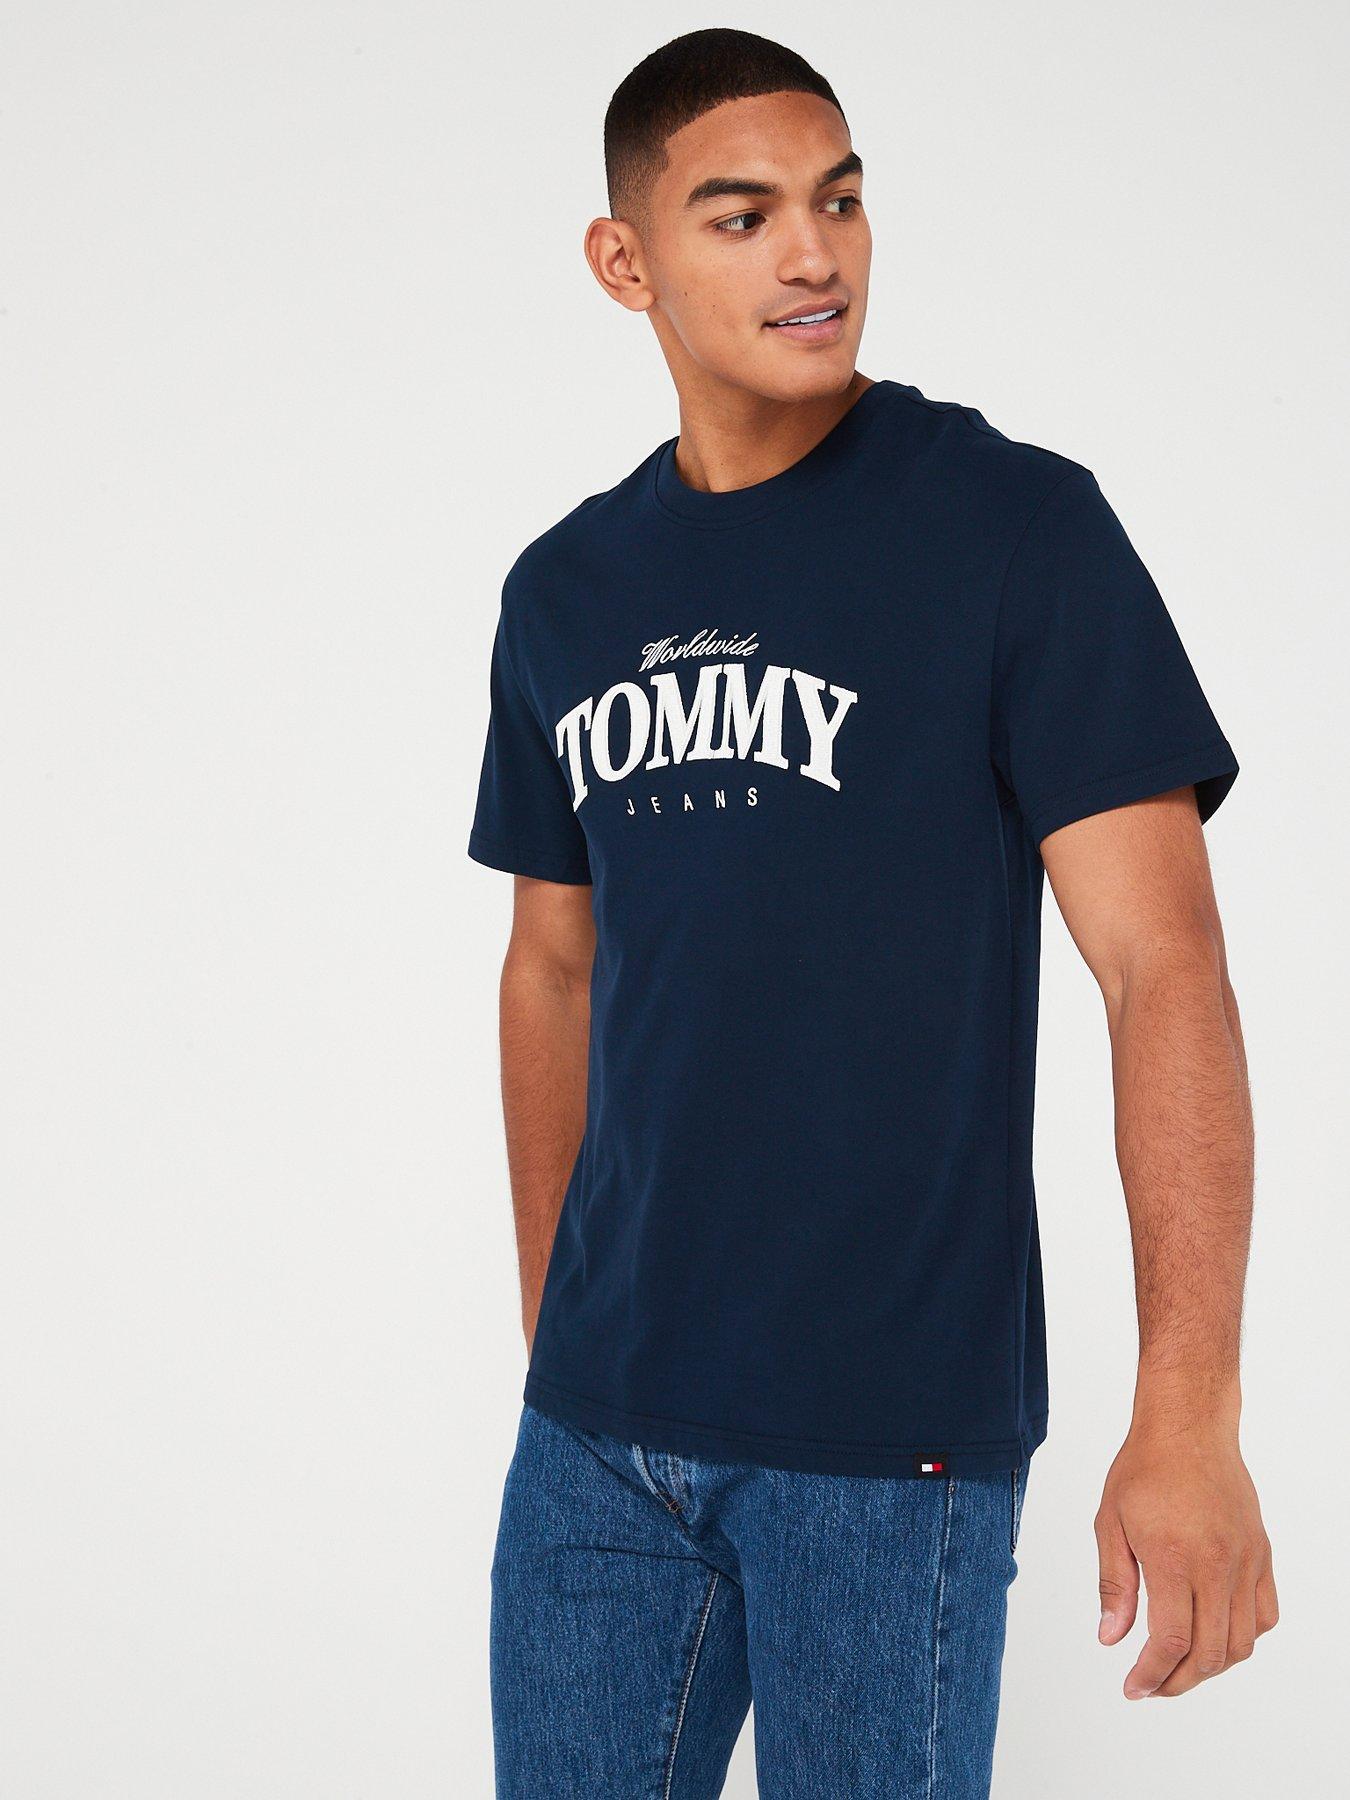 T-shirts Men Ireland Very | polos Tommy | | & hilfiger